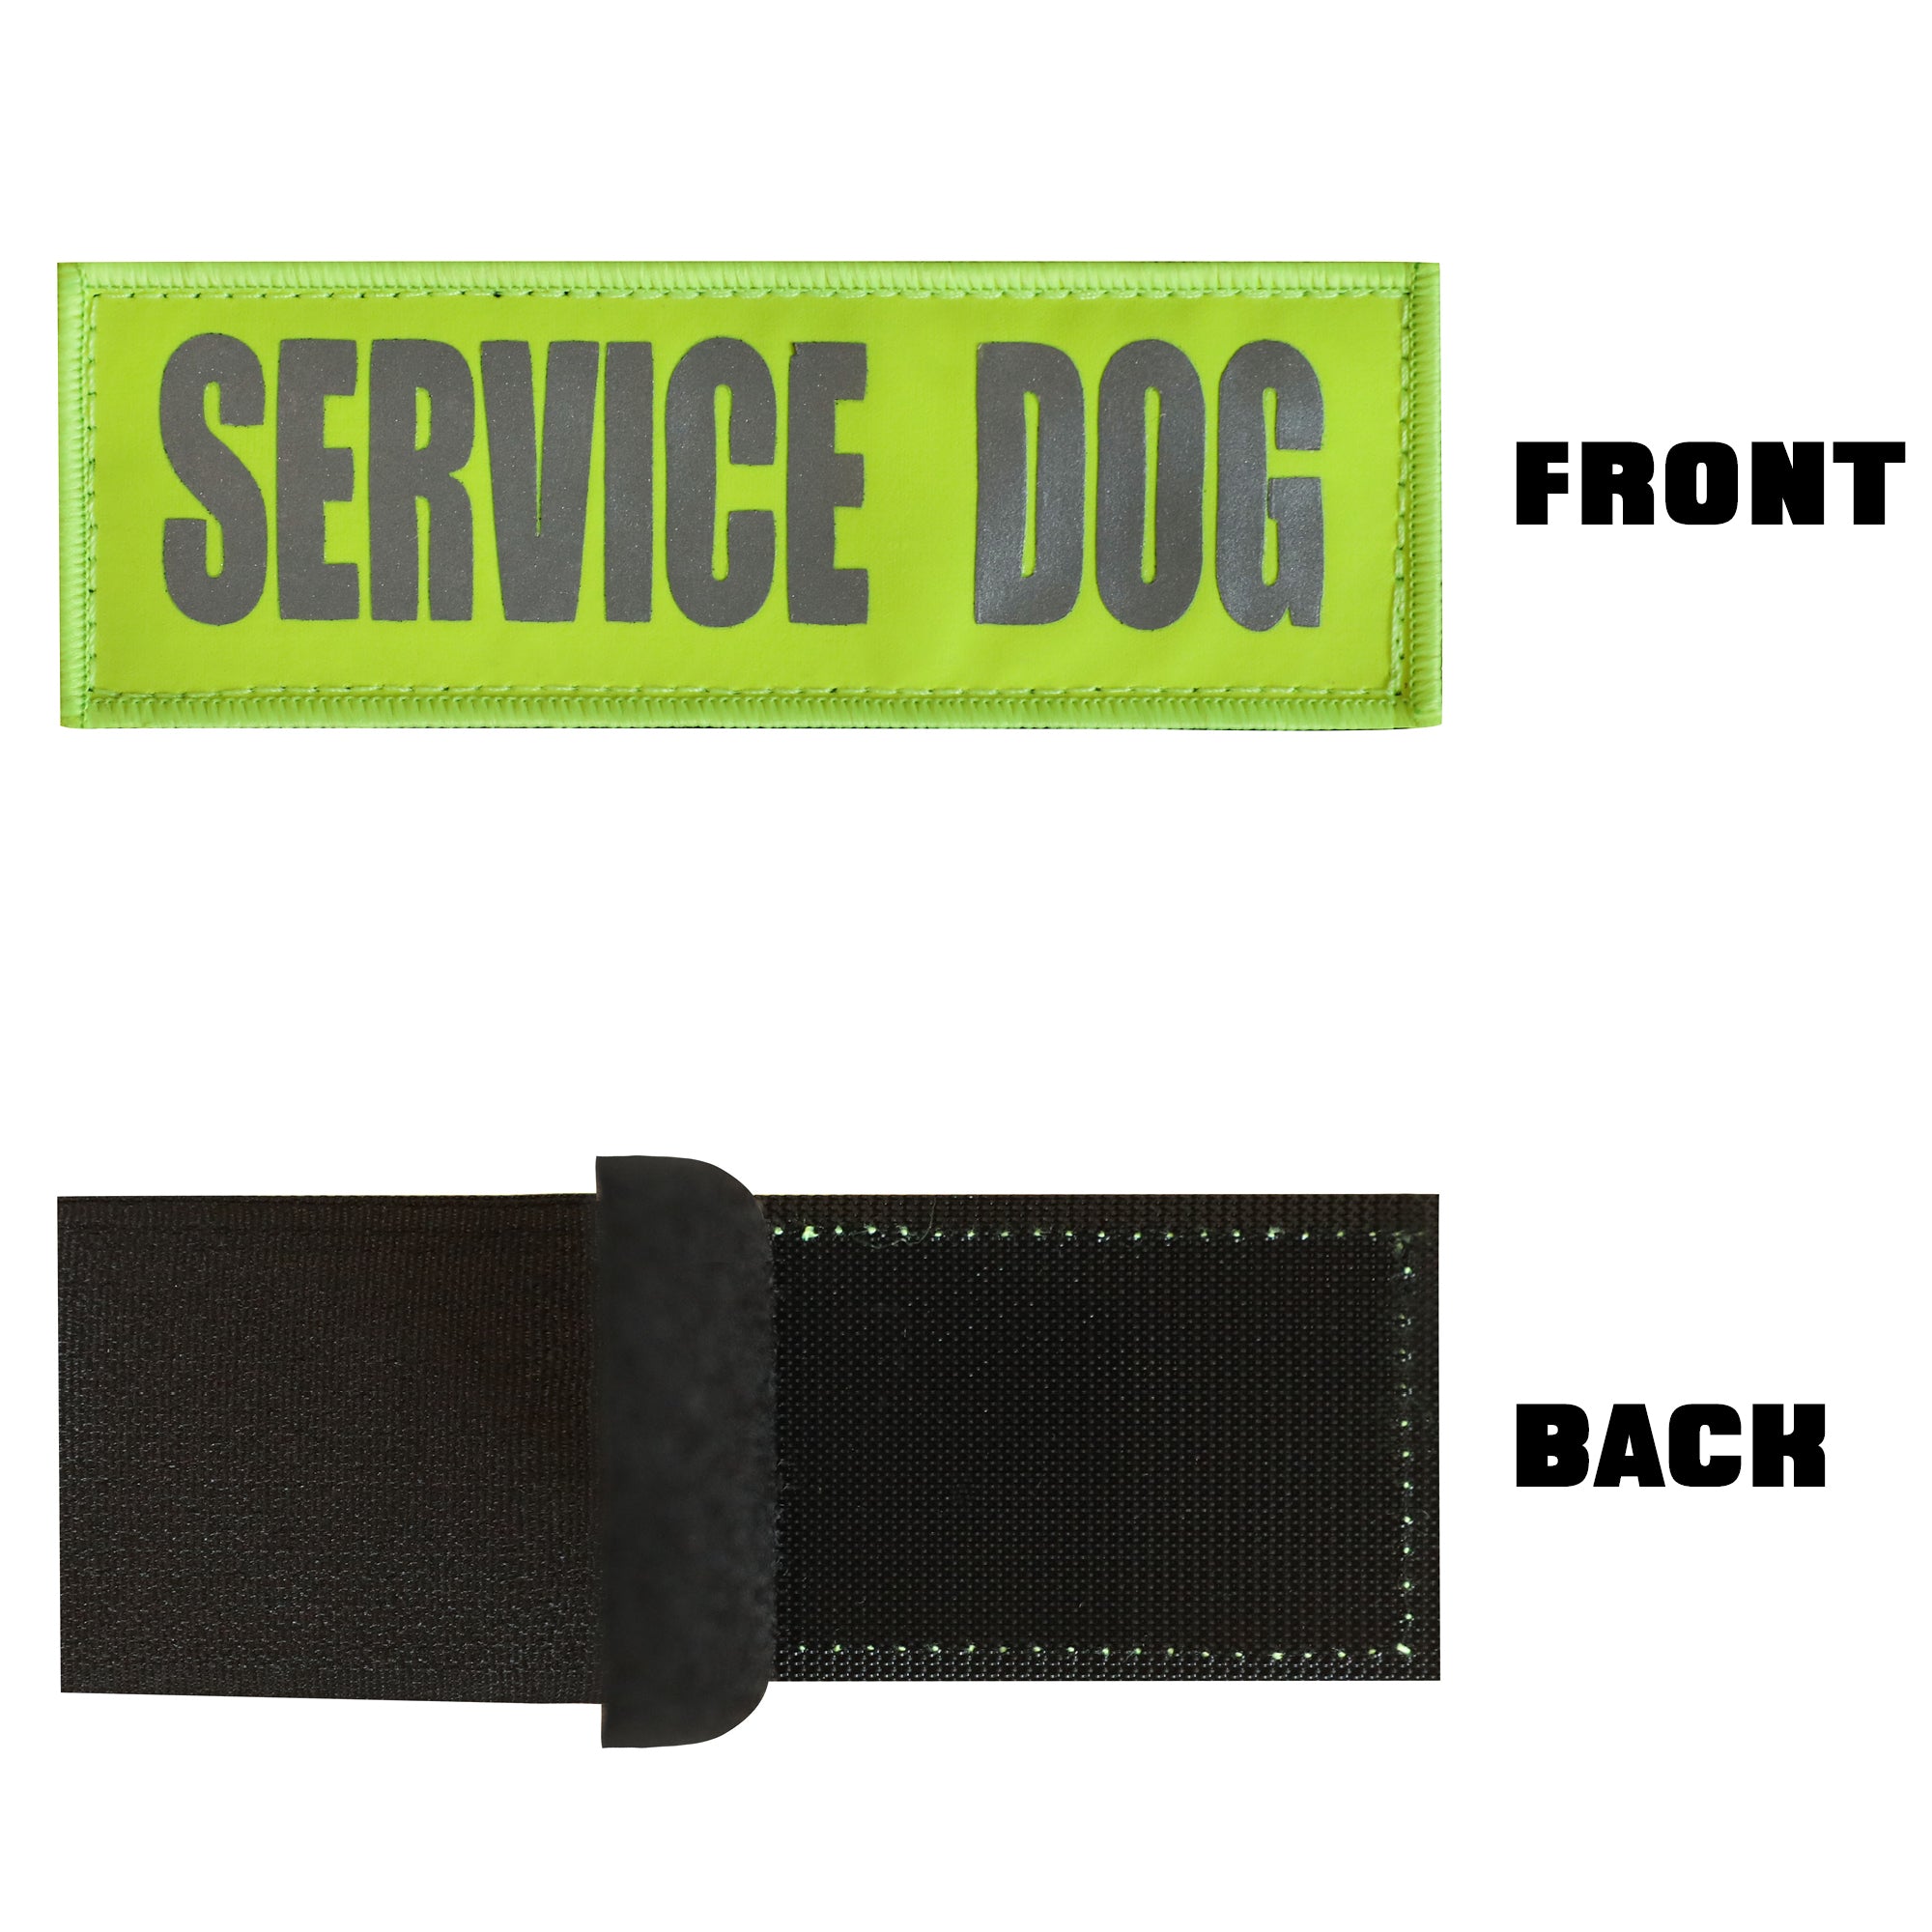 14er Reflective Service Dog Patches (9-Pack)